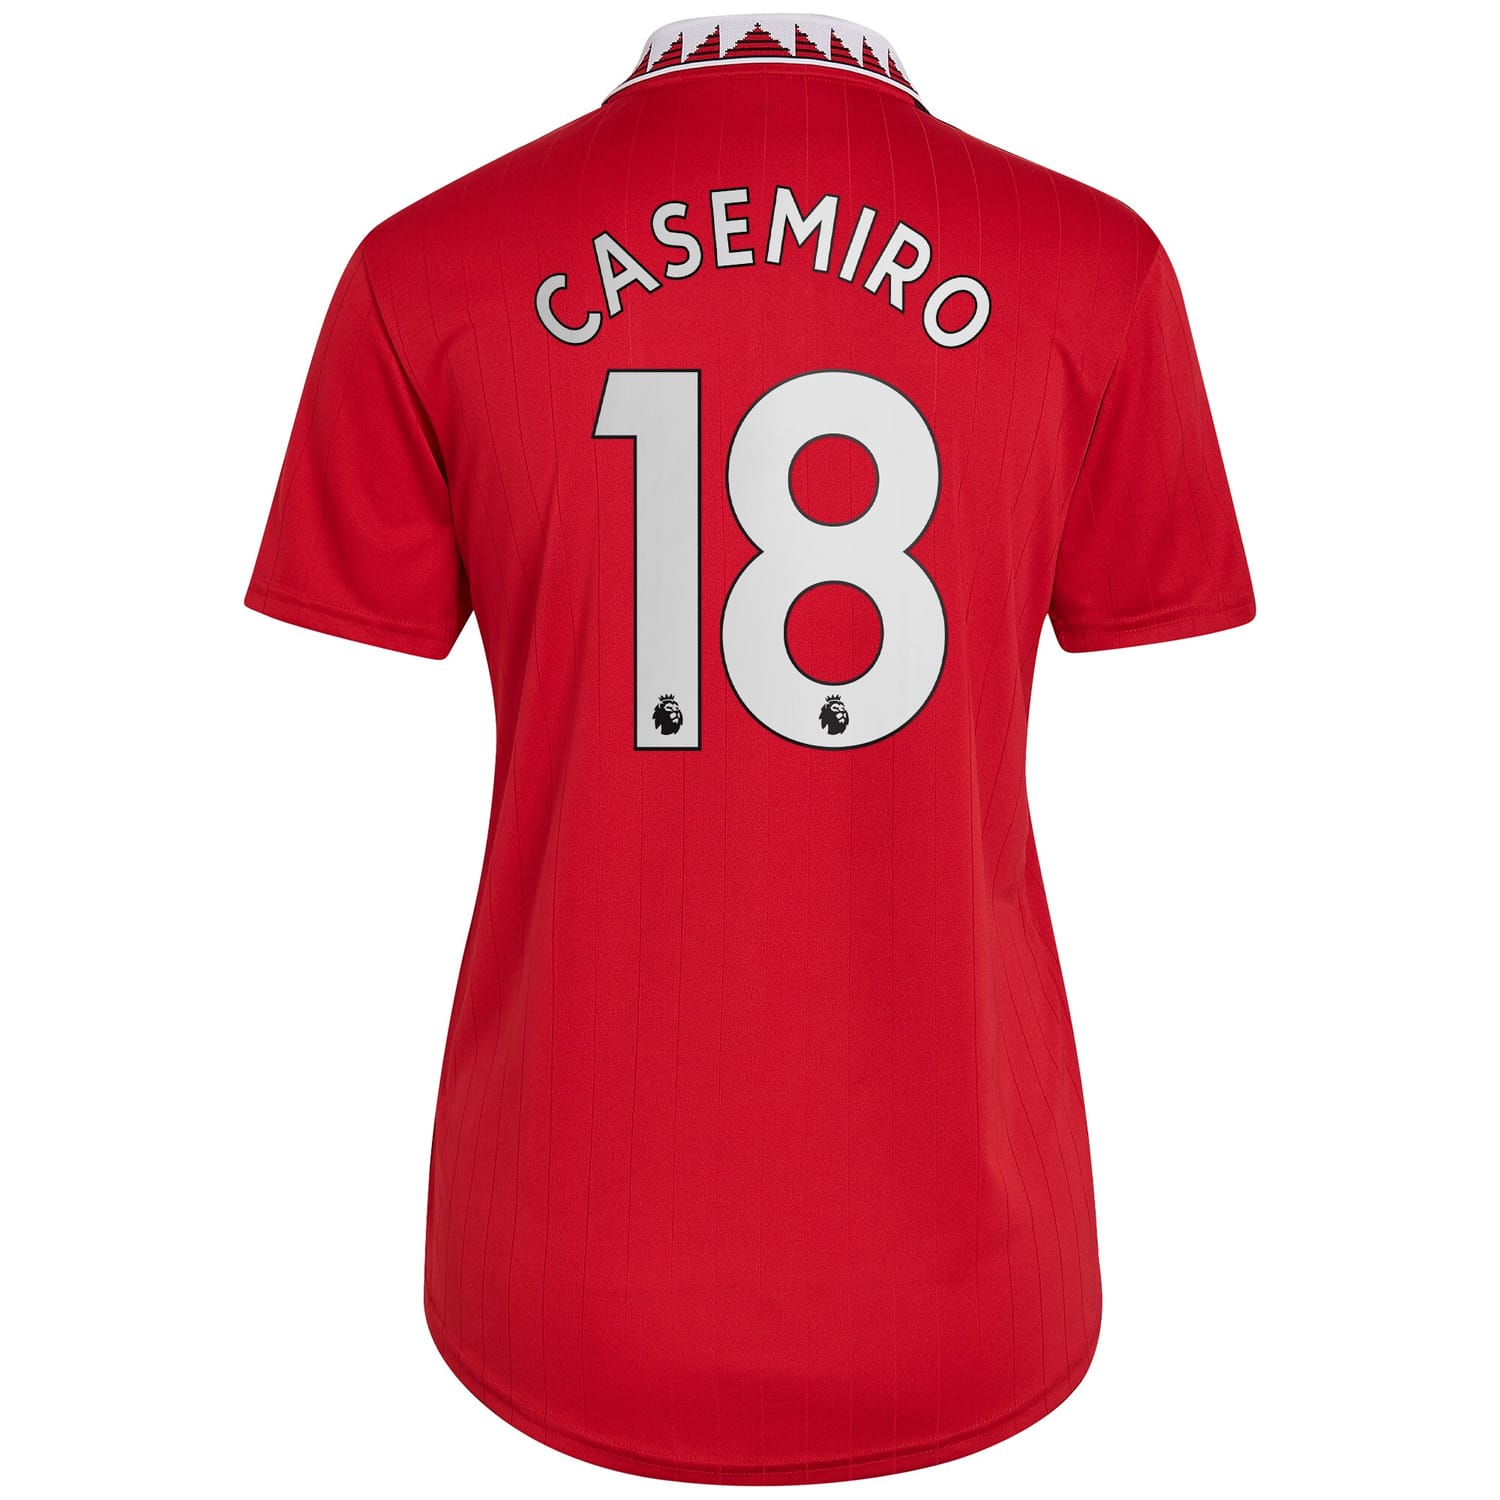 Premier League Manchester United Home Jersey Shirt Red 2022-23 player Casemiro printing for Women